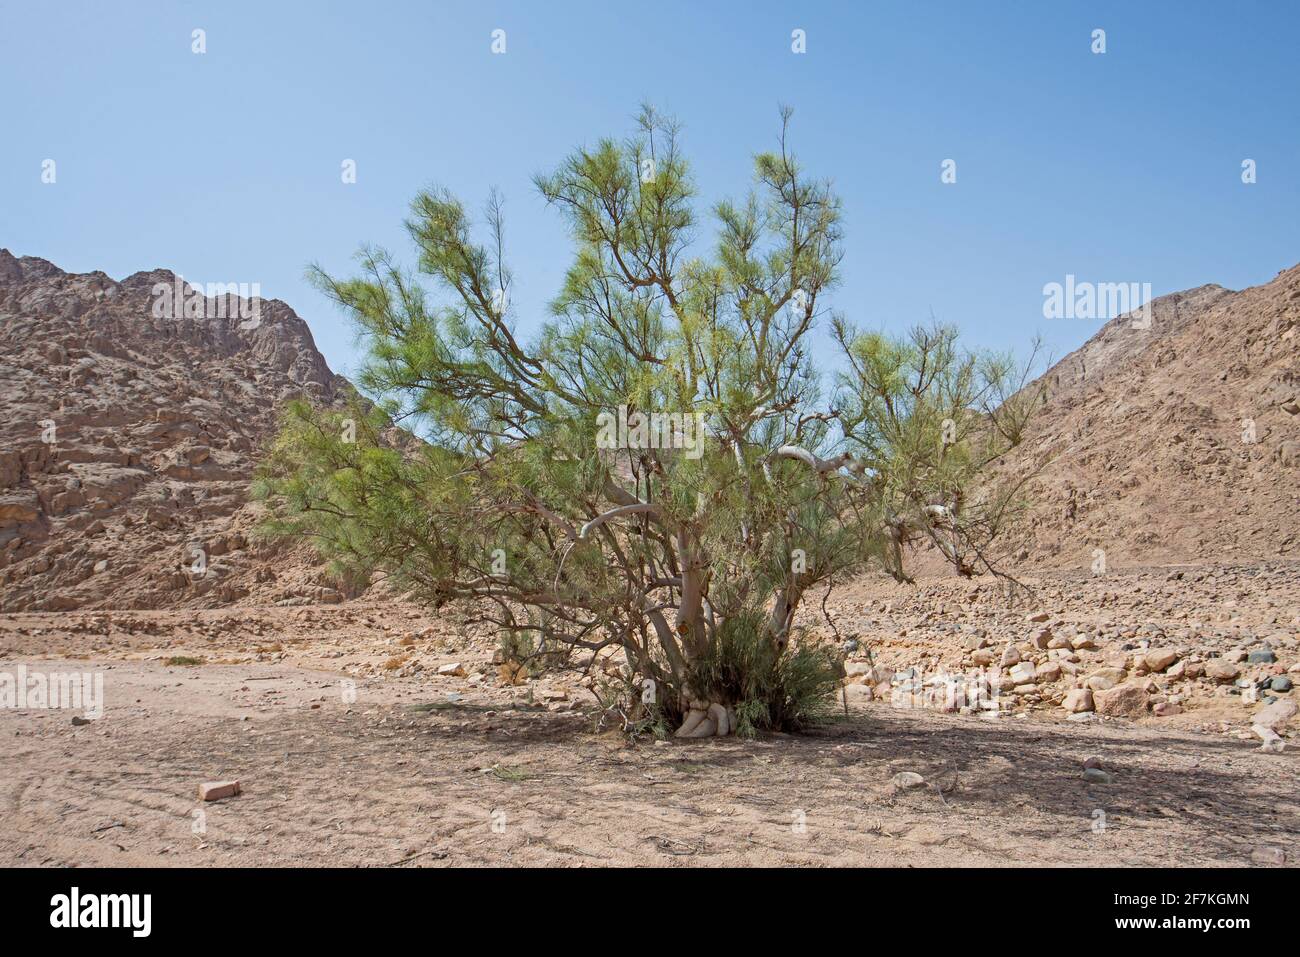 Landscape scenic view of desolate barren eastern desert in Egypt with lone acacia tree and mountains Stock Photo